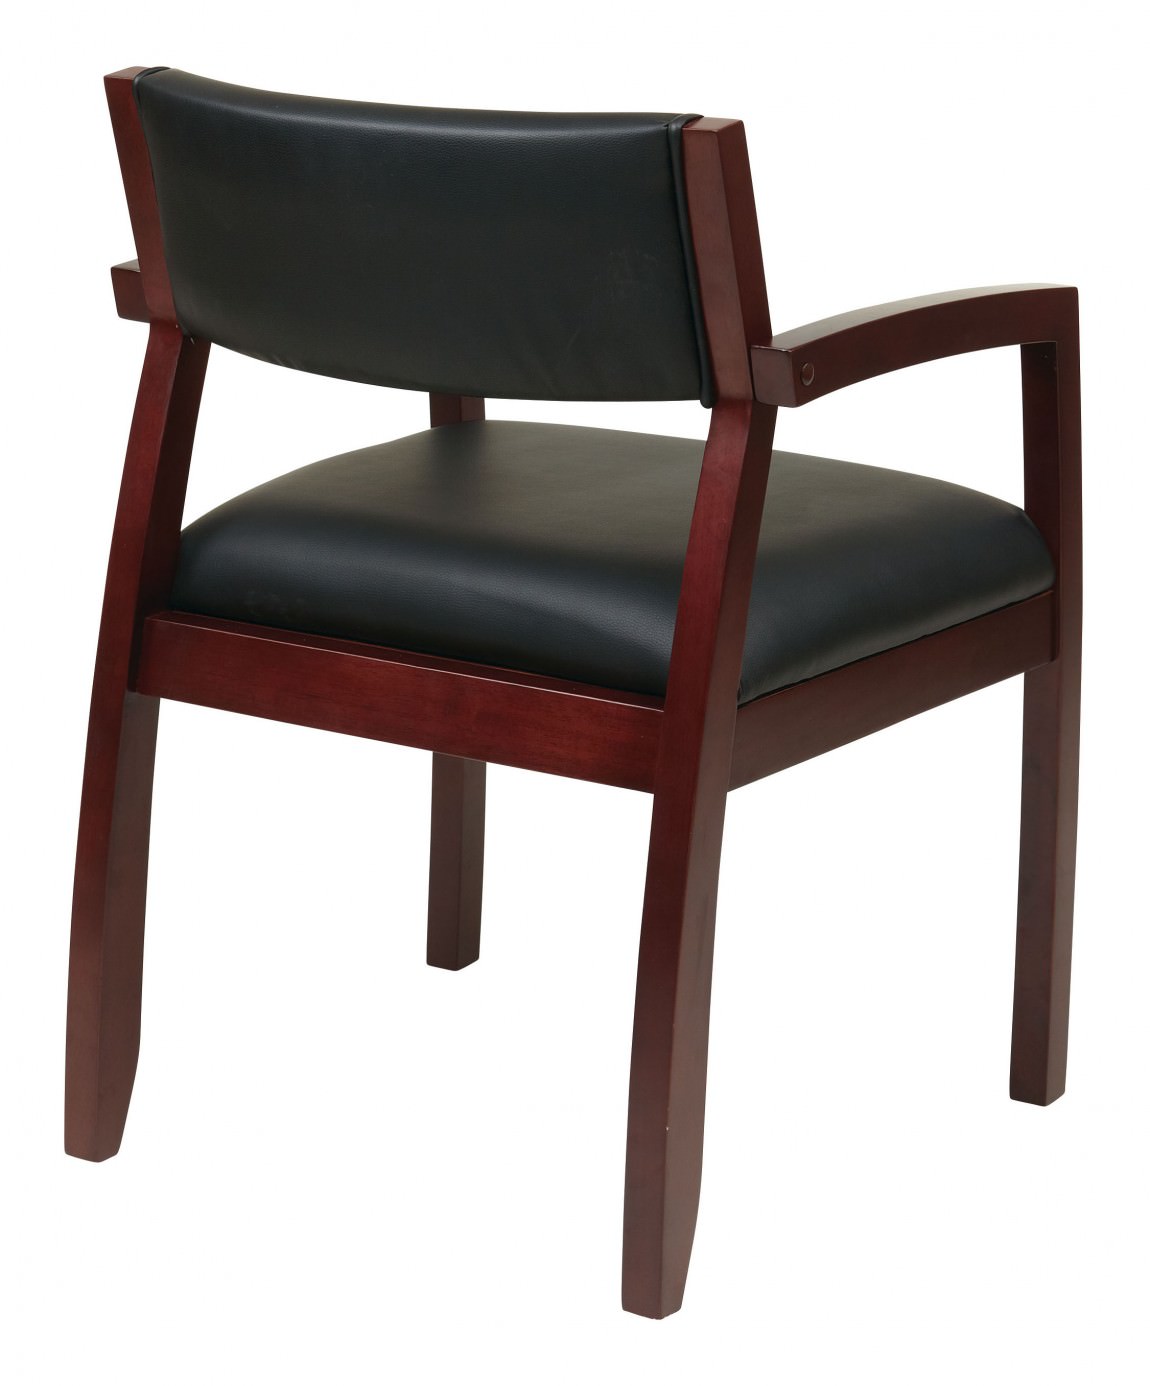 Guest Chair for Office | OSP Furniture by Office Star Products